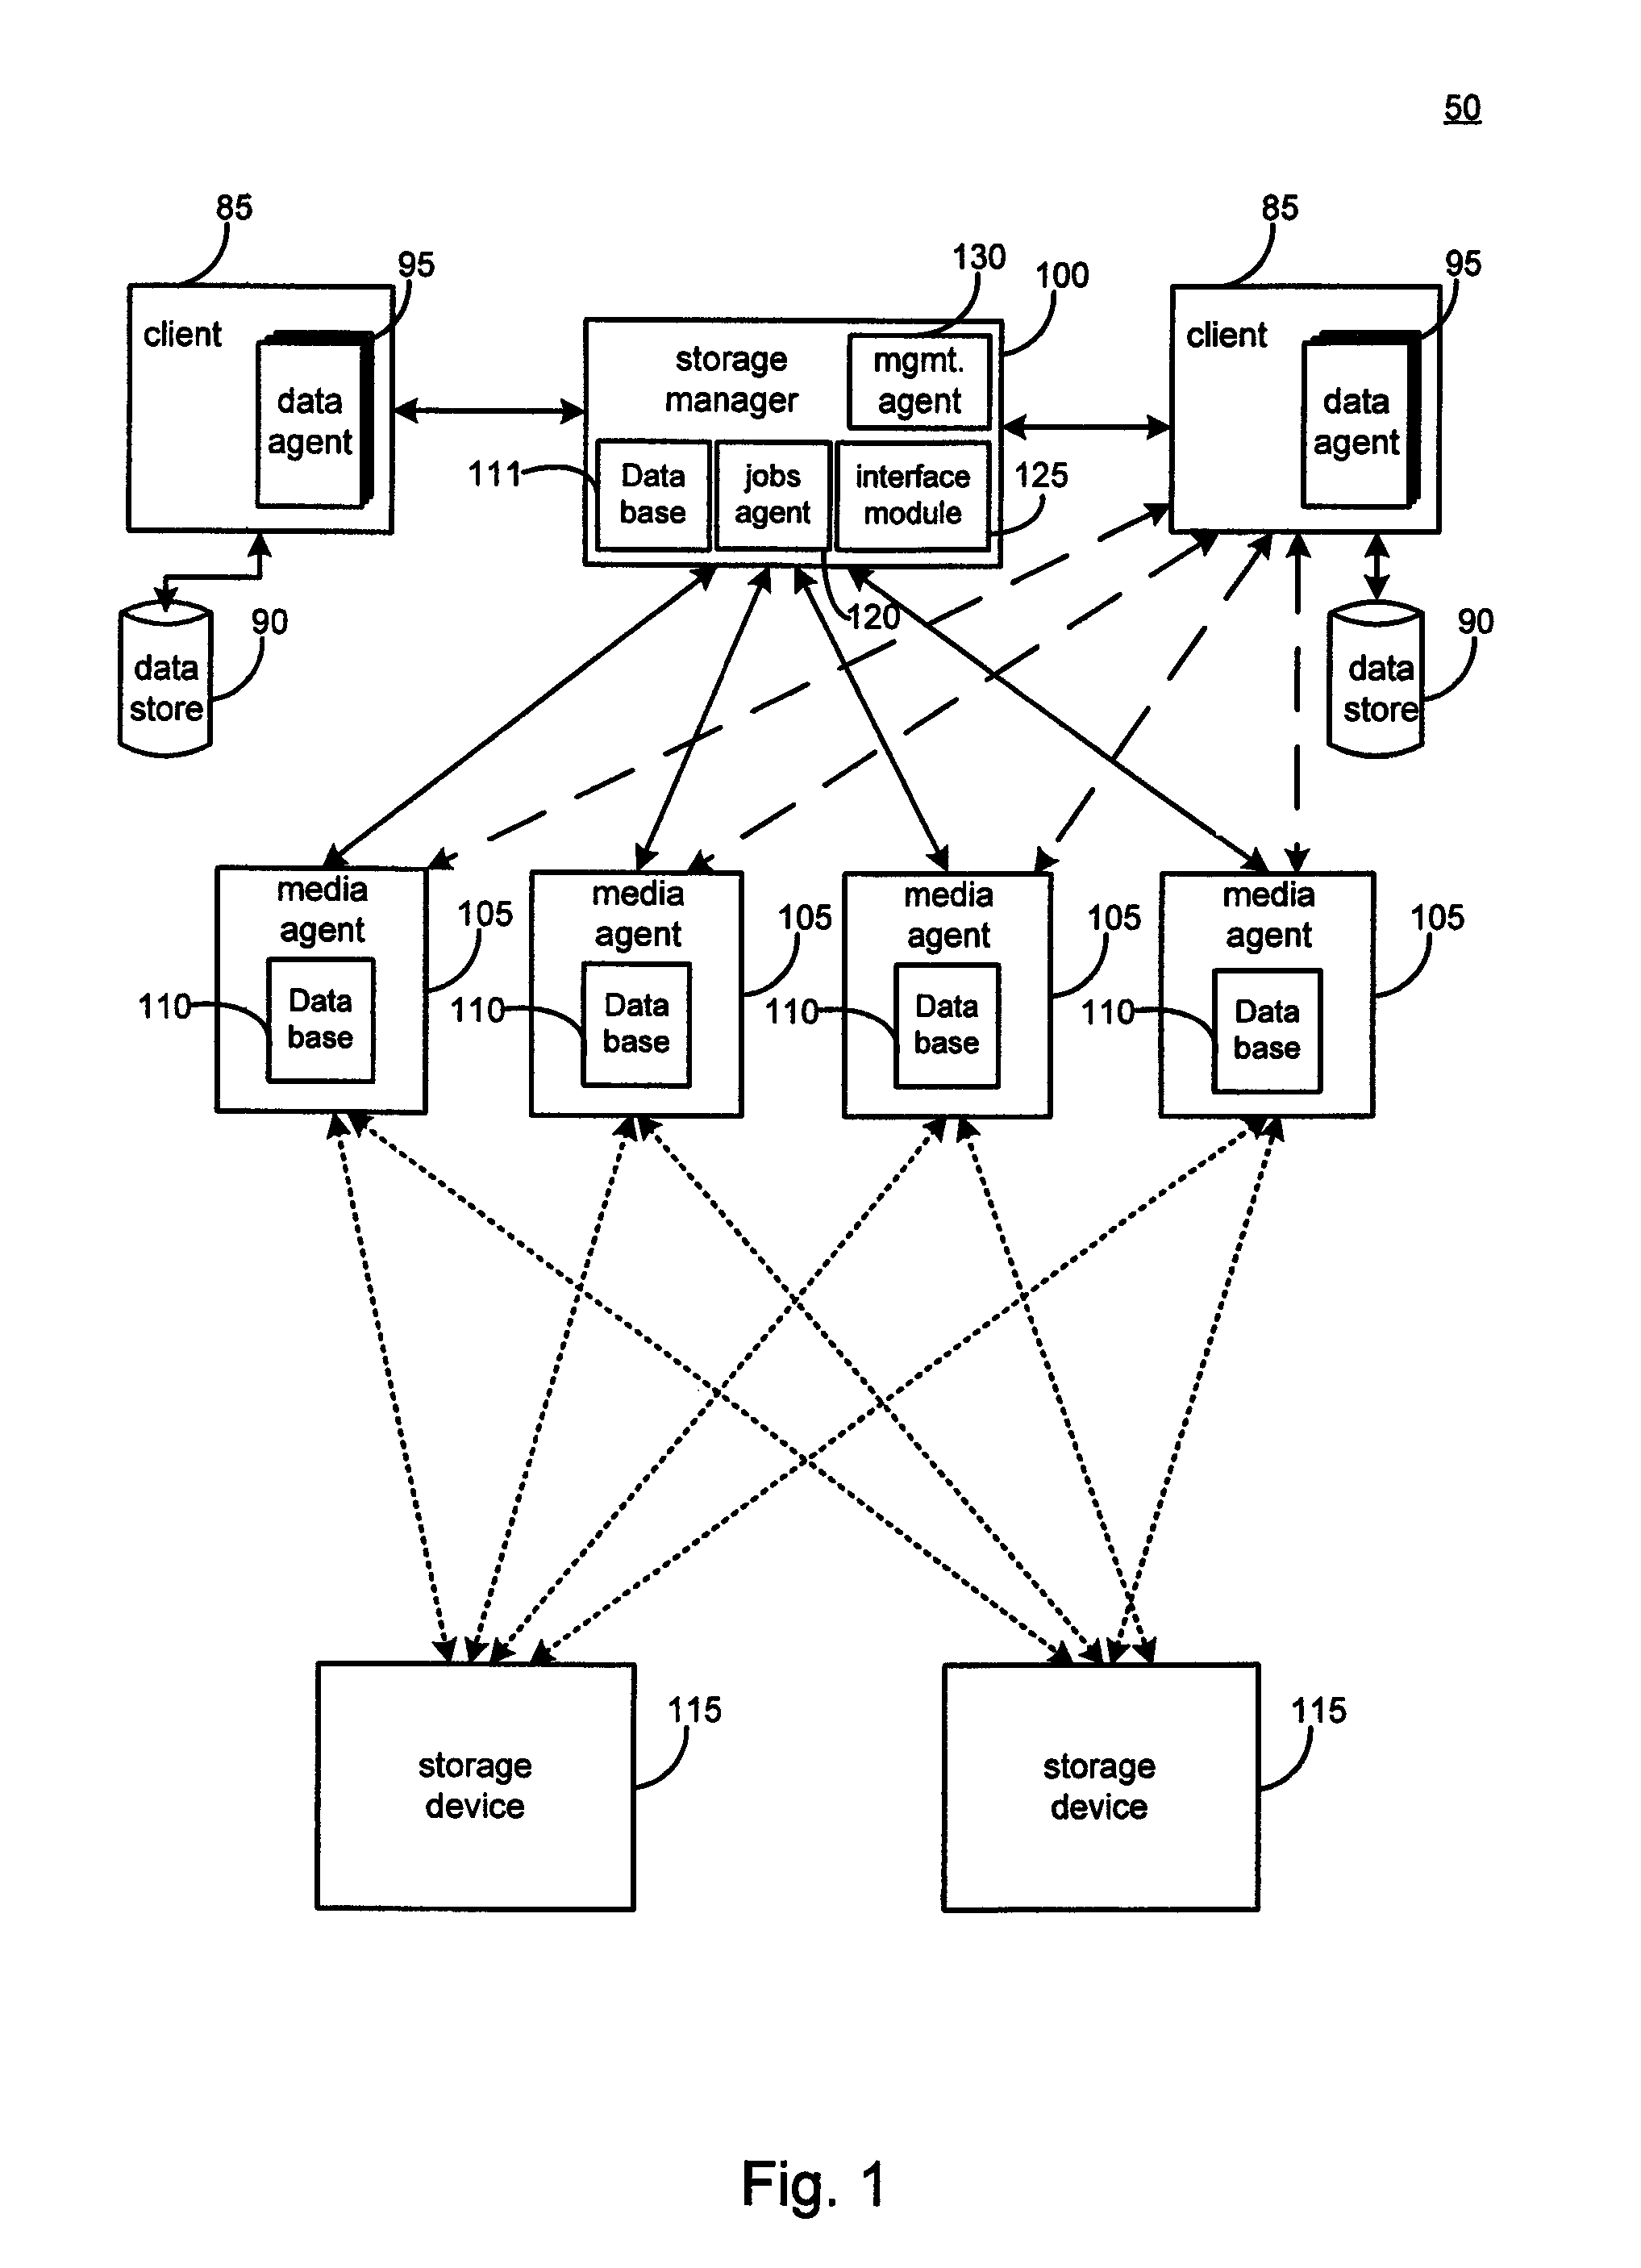 System and method for containerized data storage and tracking